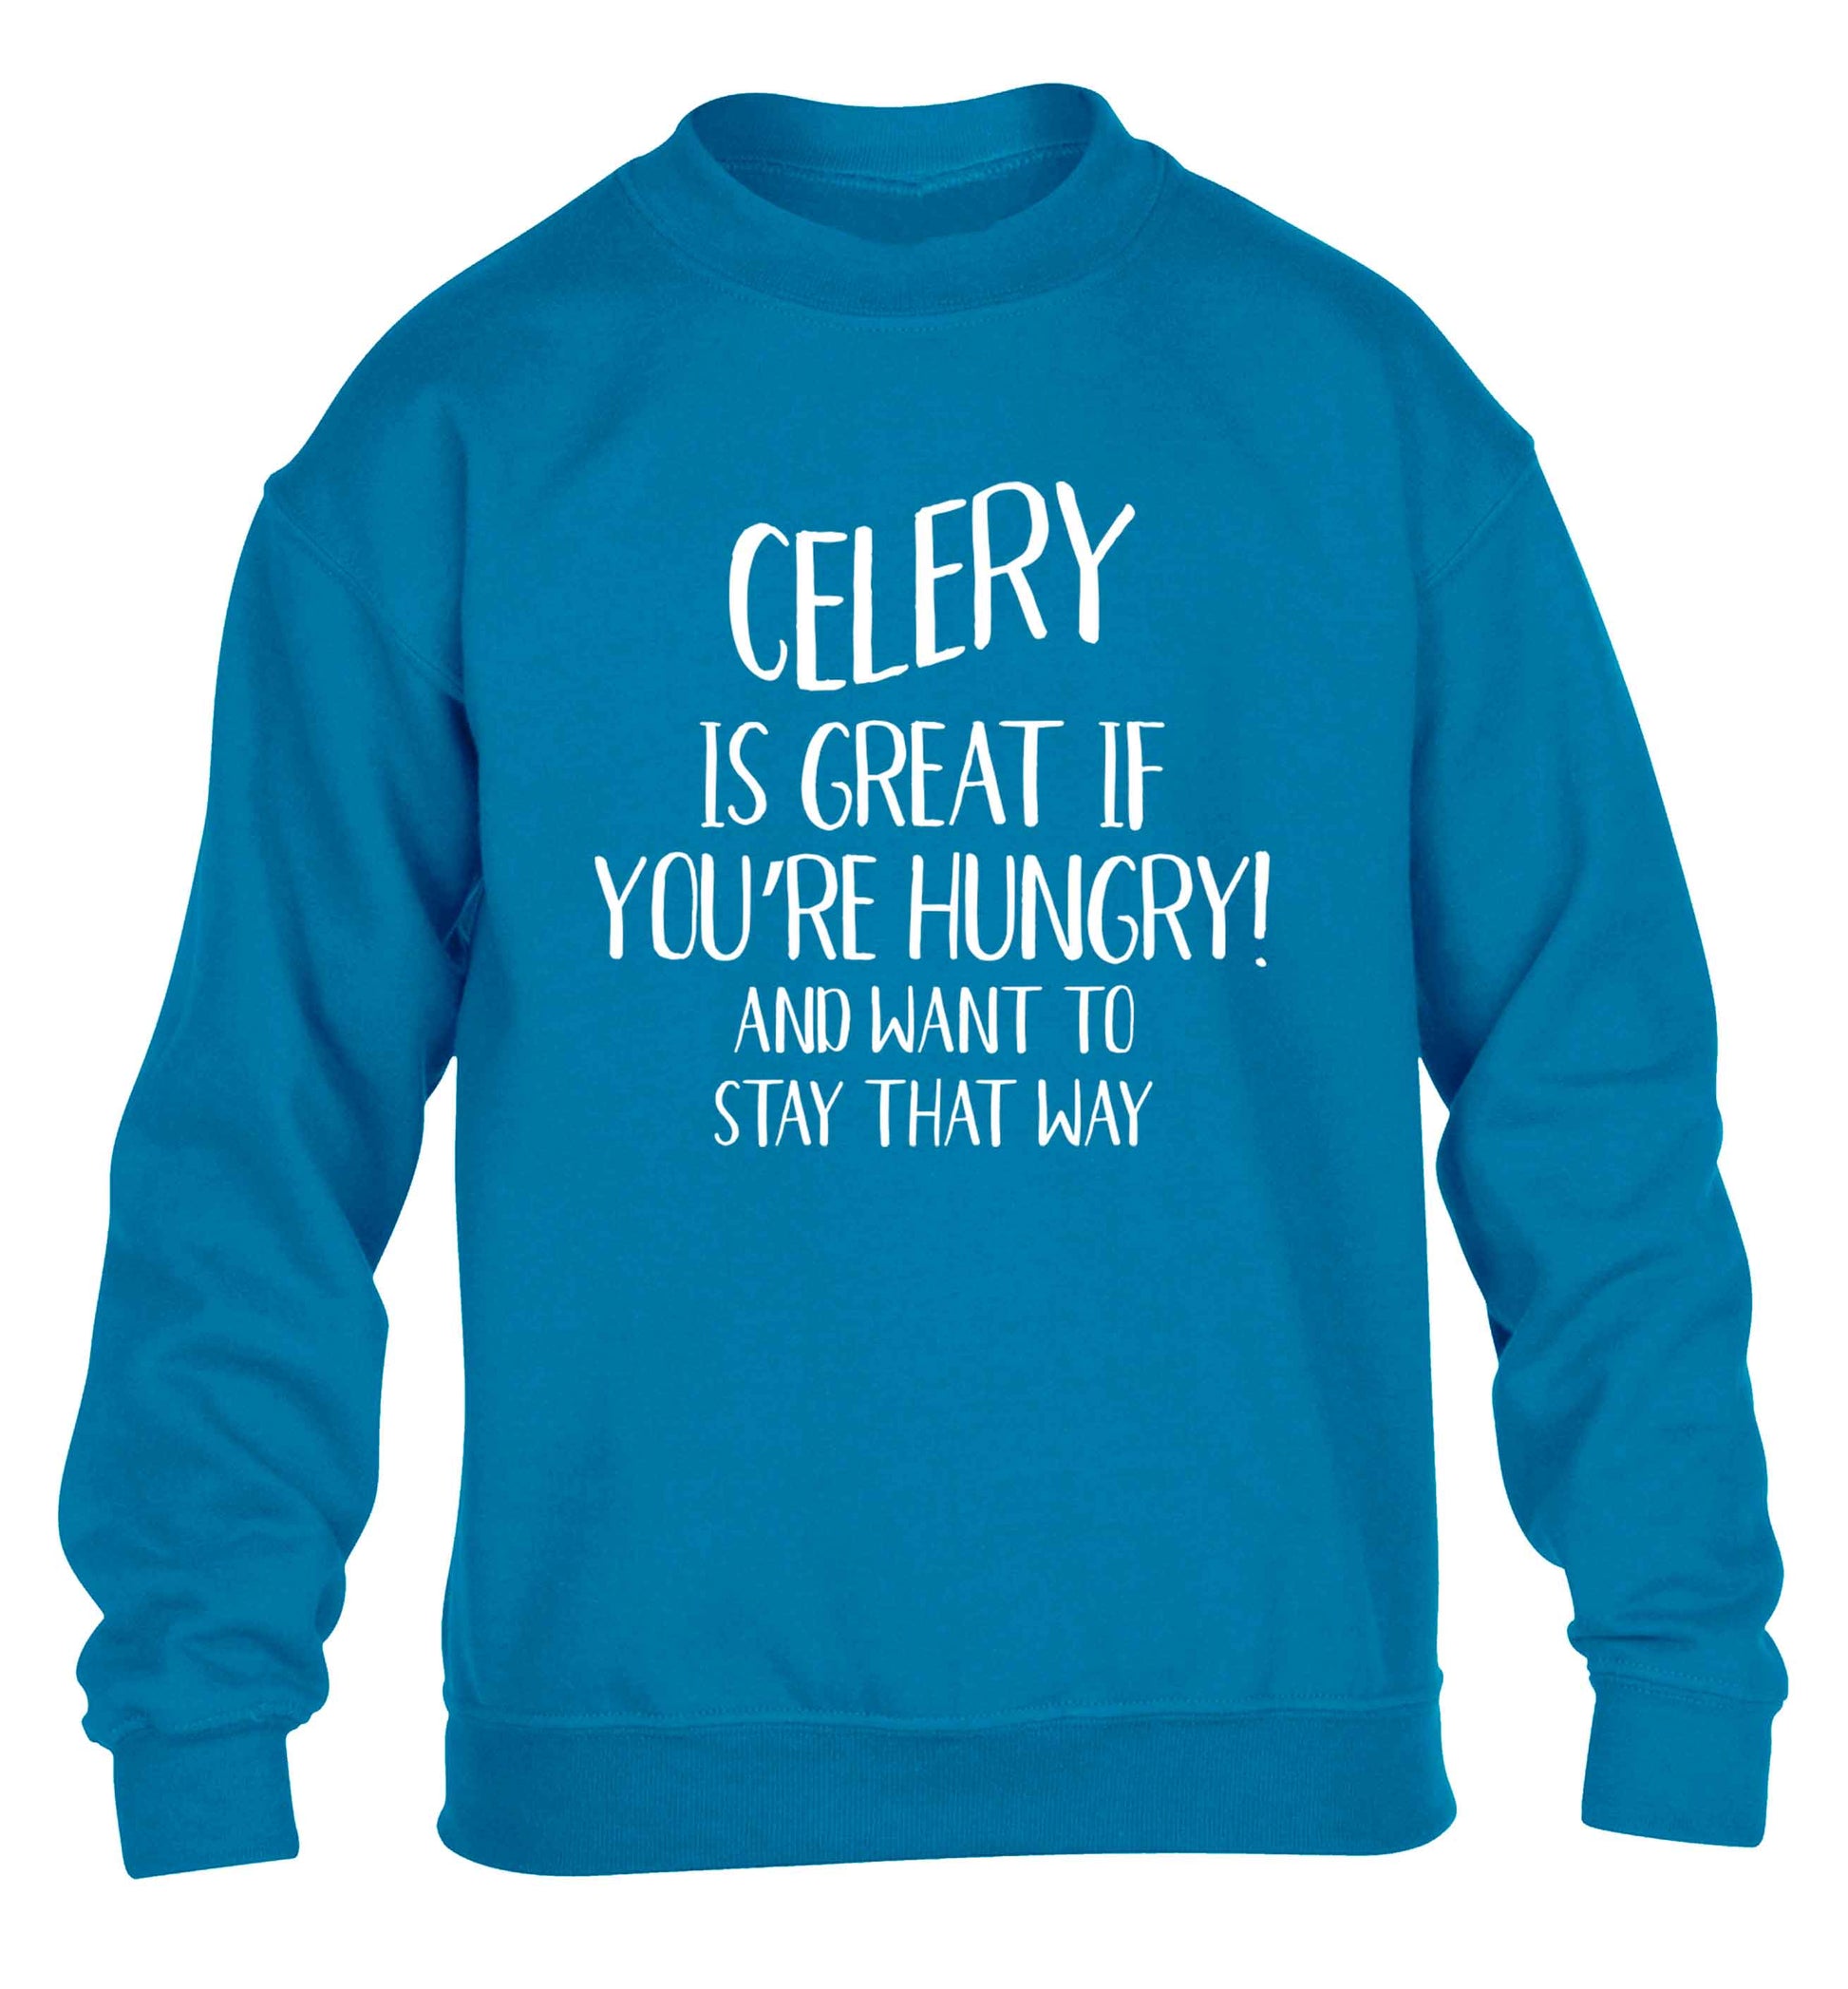 Cellery is great when you're hungry and want to stay that way children's blue sweater 12-13 Years